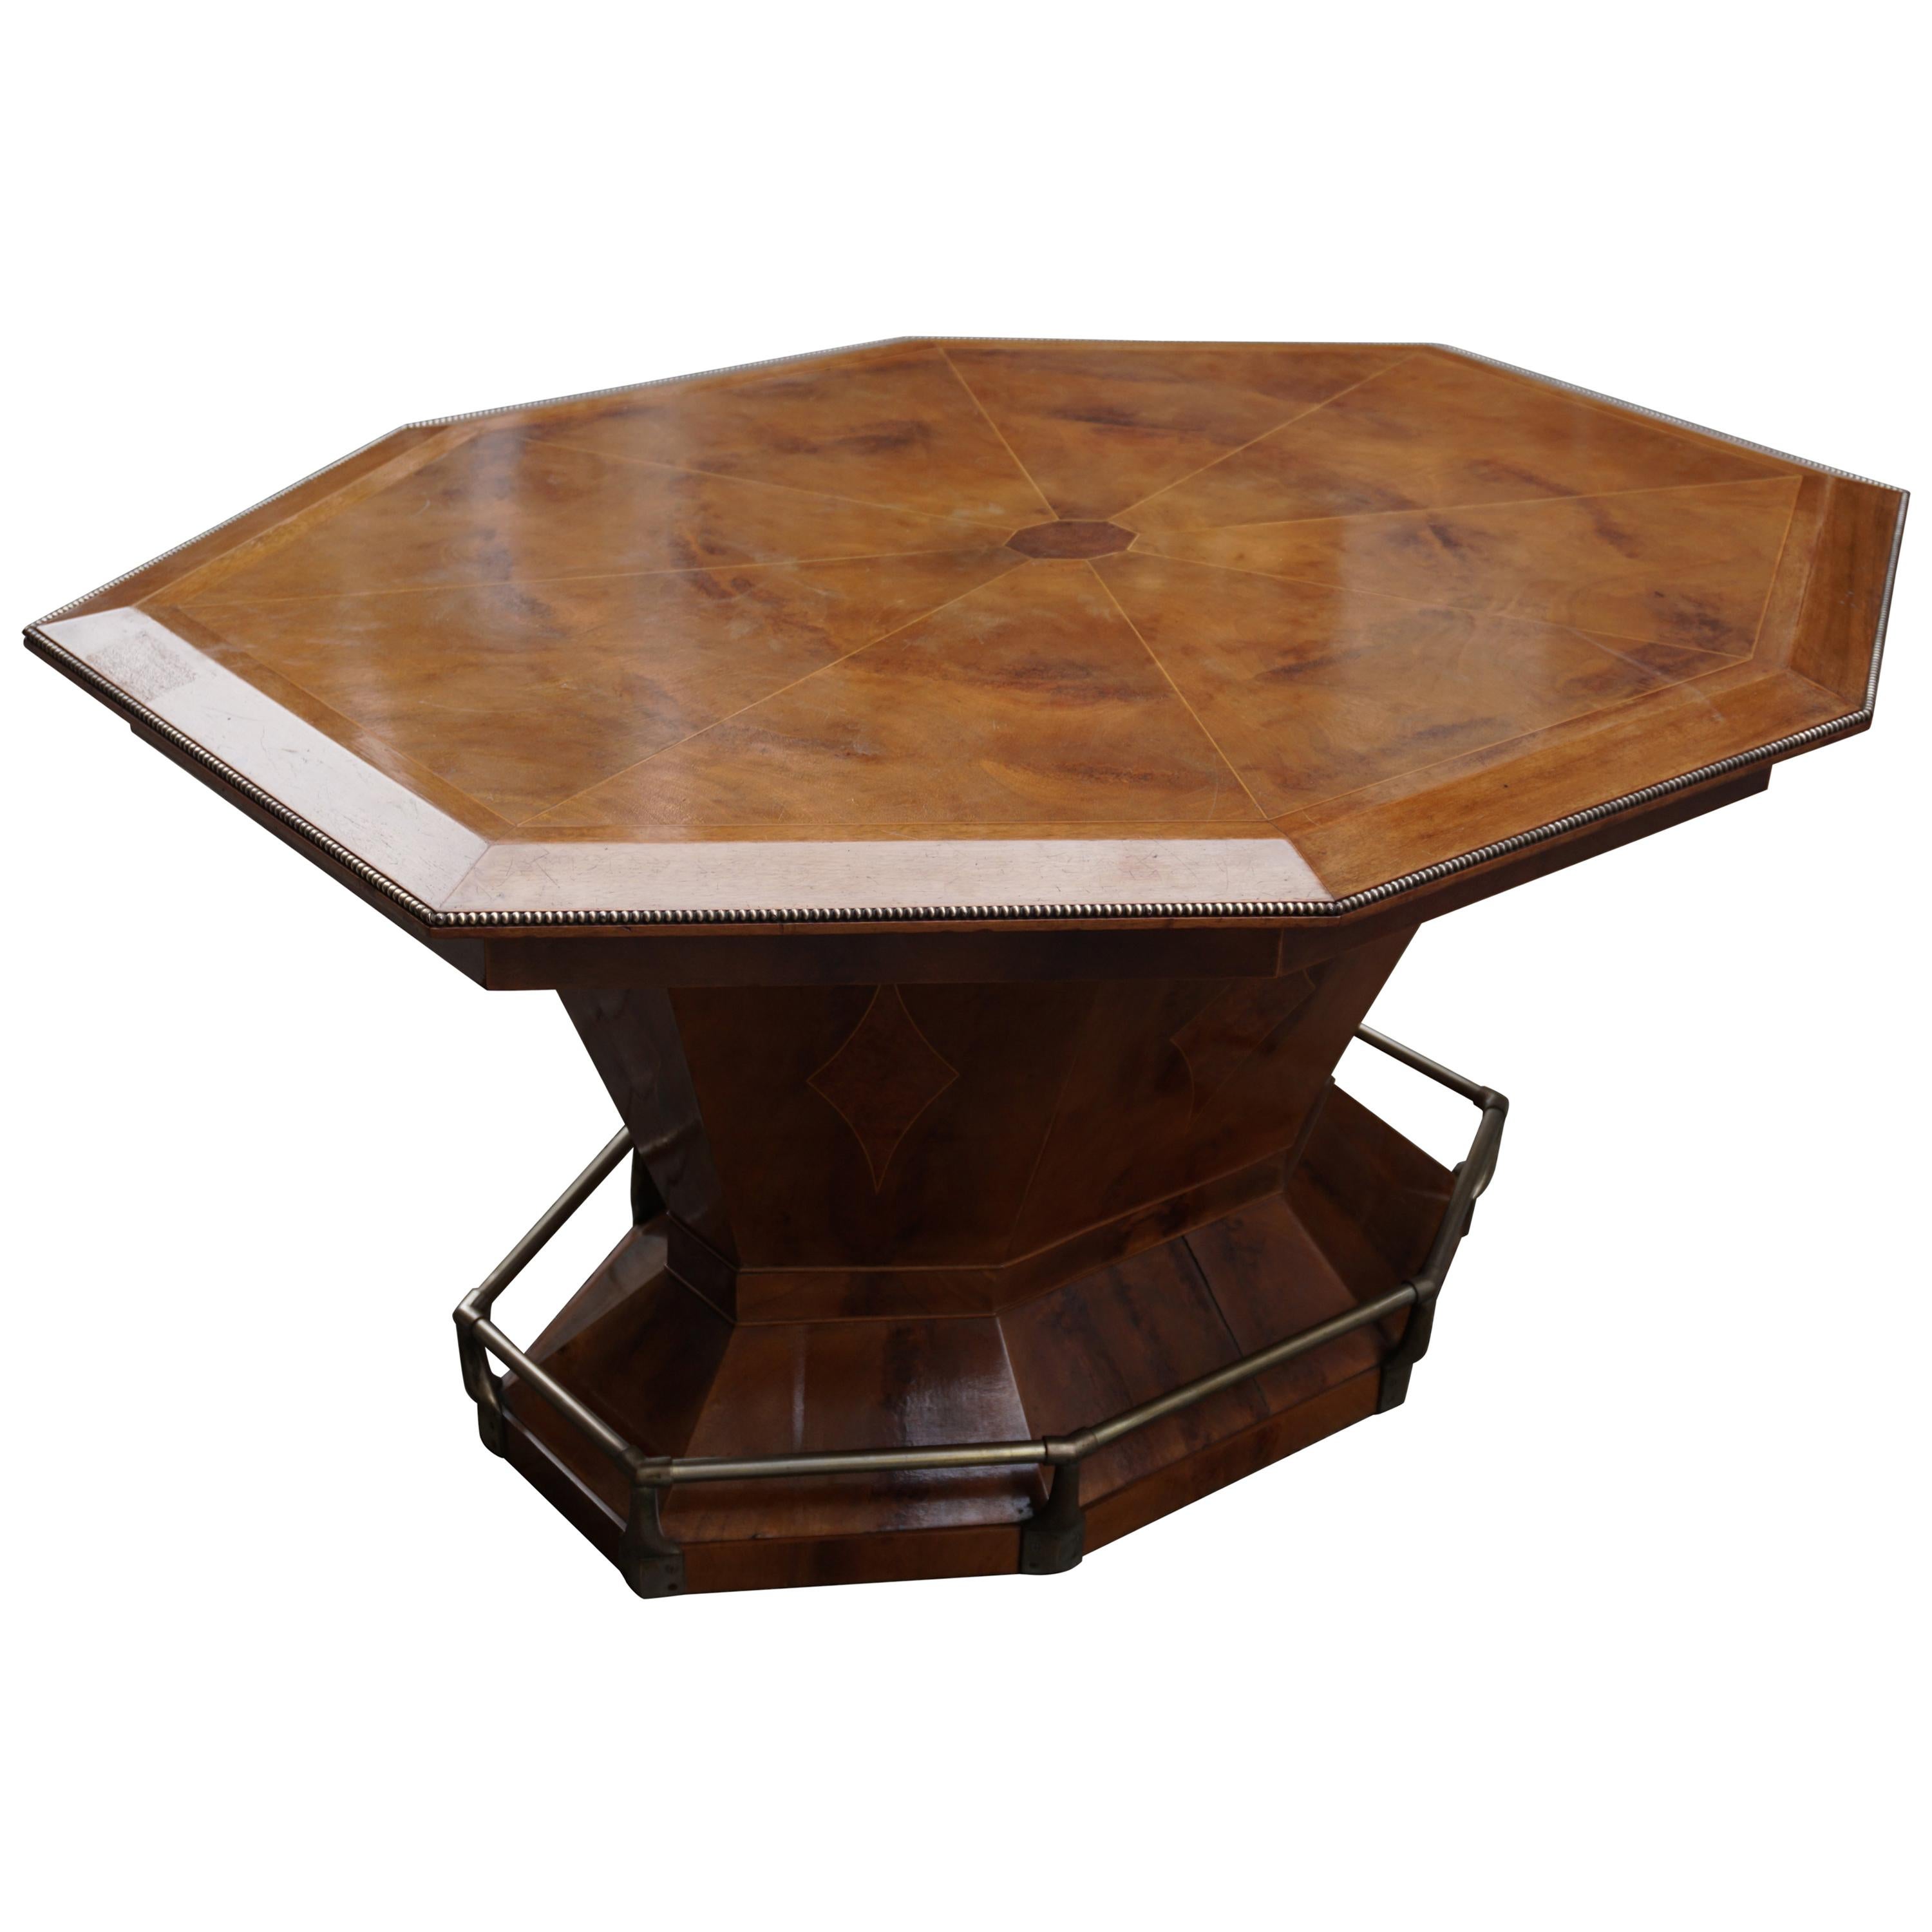 Beautiful Belgium Art Deco octagonal dining table or desk and writing table. Made in the 1920s for a prominent Jewish family from Antwerp working in the diamond industry. Antwerp, Belgium is the diamond capital of the world. Made of walnut and of